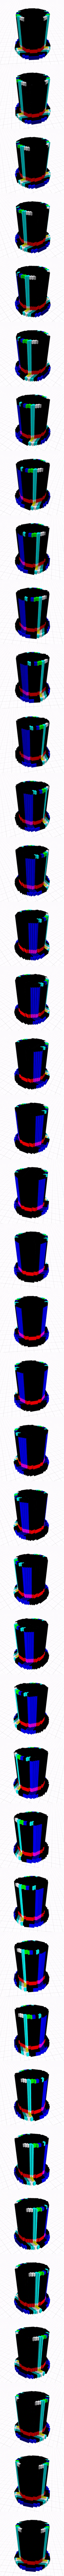 Toon 399 one-of-a-kind RGB Top-Hat